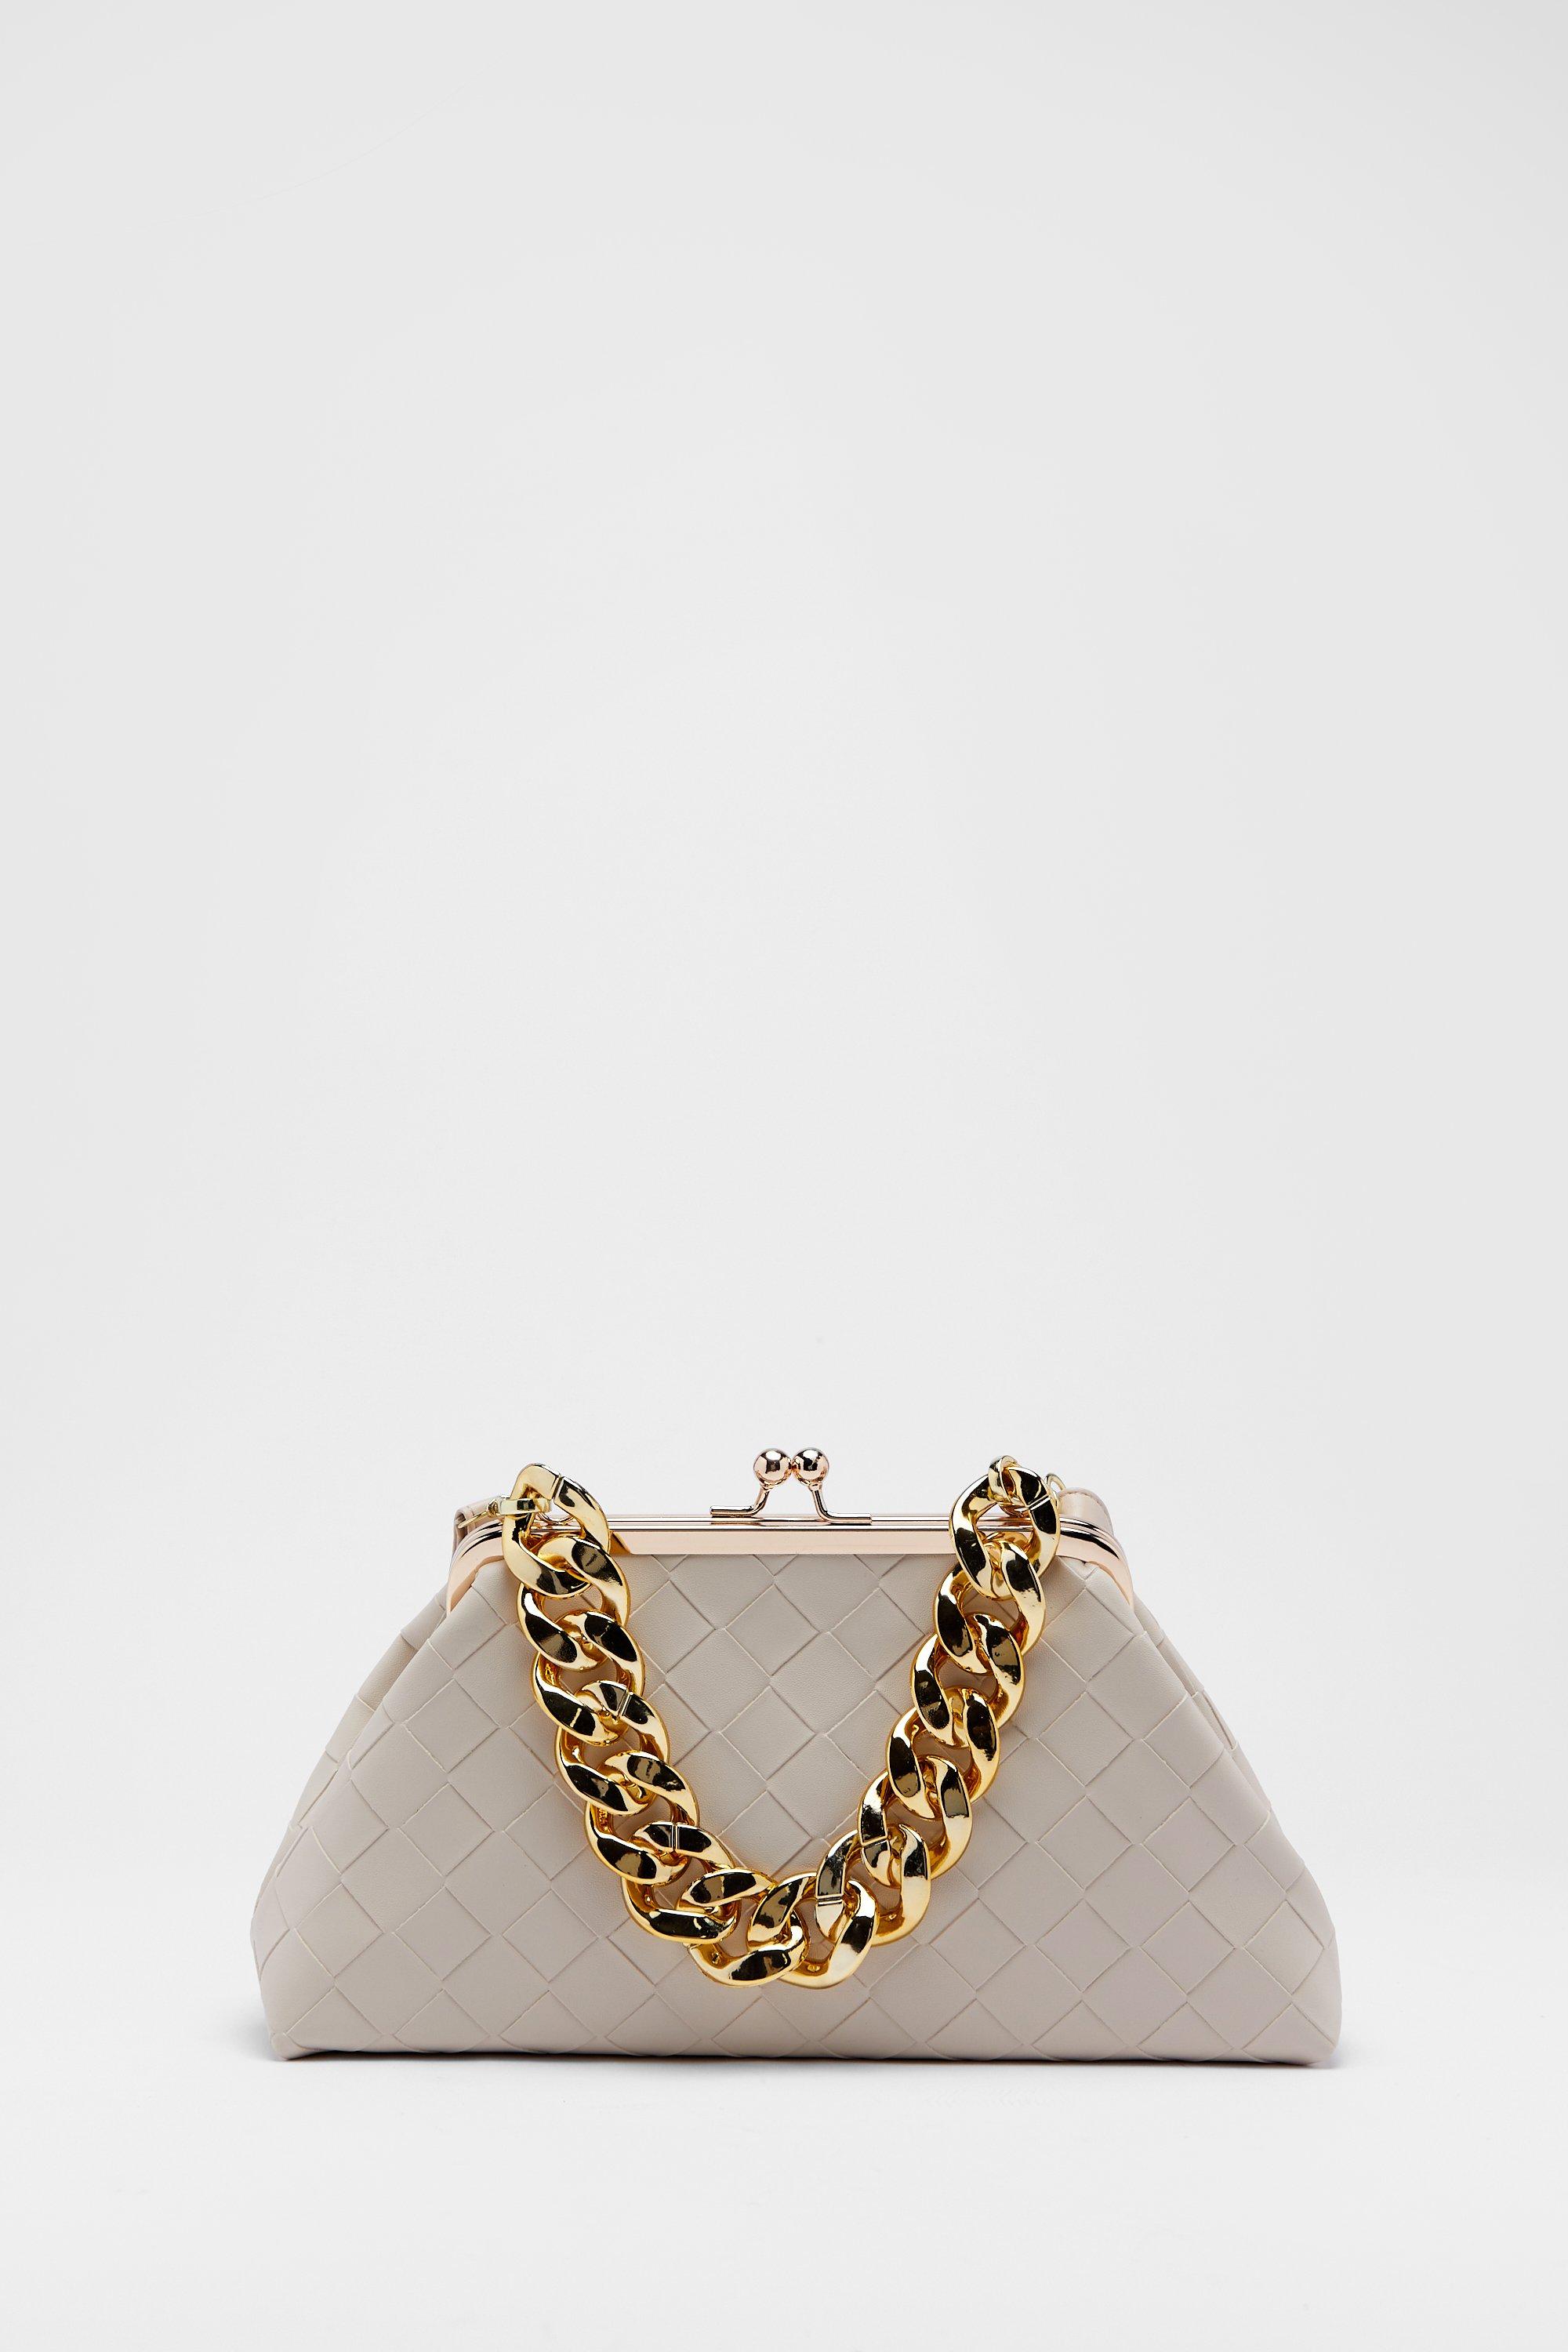 Nasty Gal Sells Vintage Chanel Bags, Clothing, and Jewelry